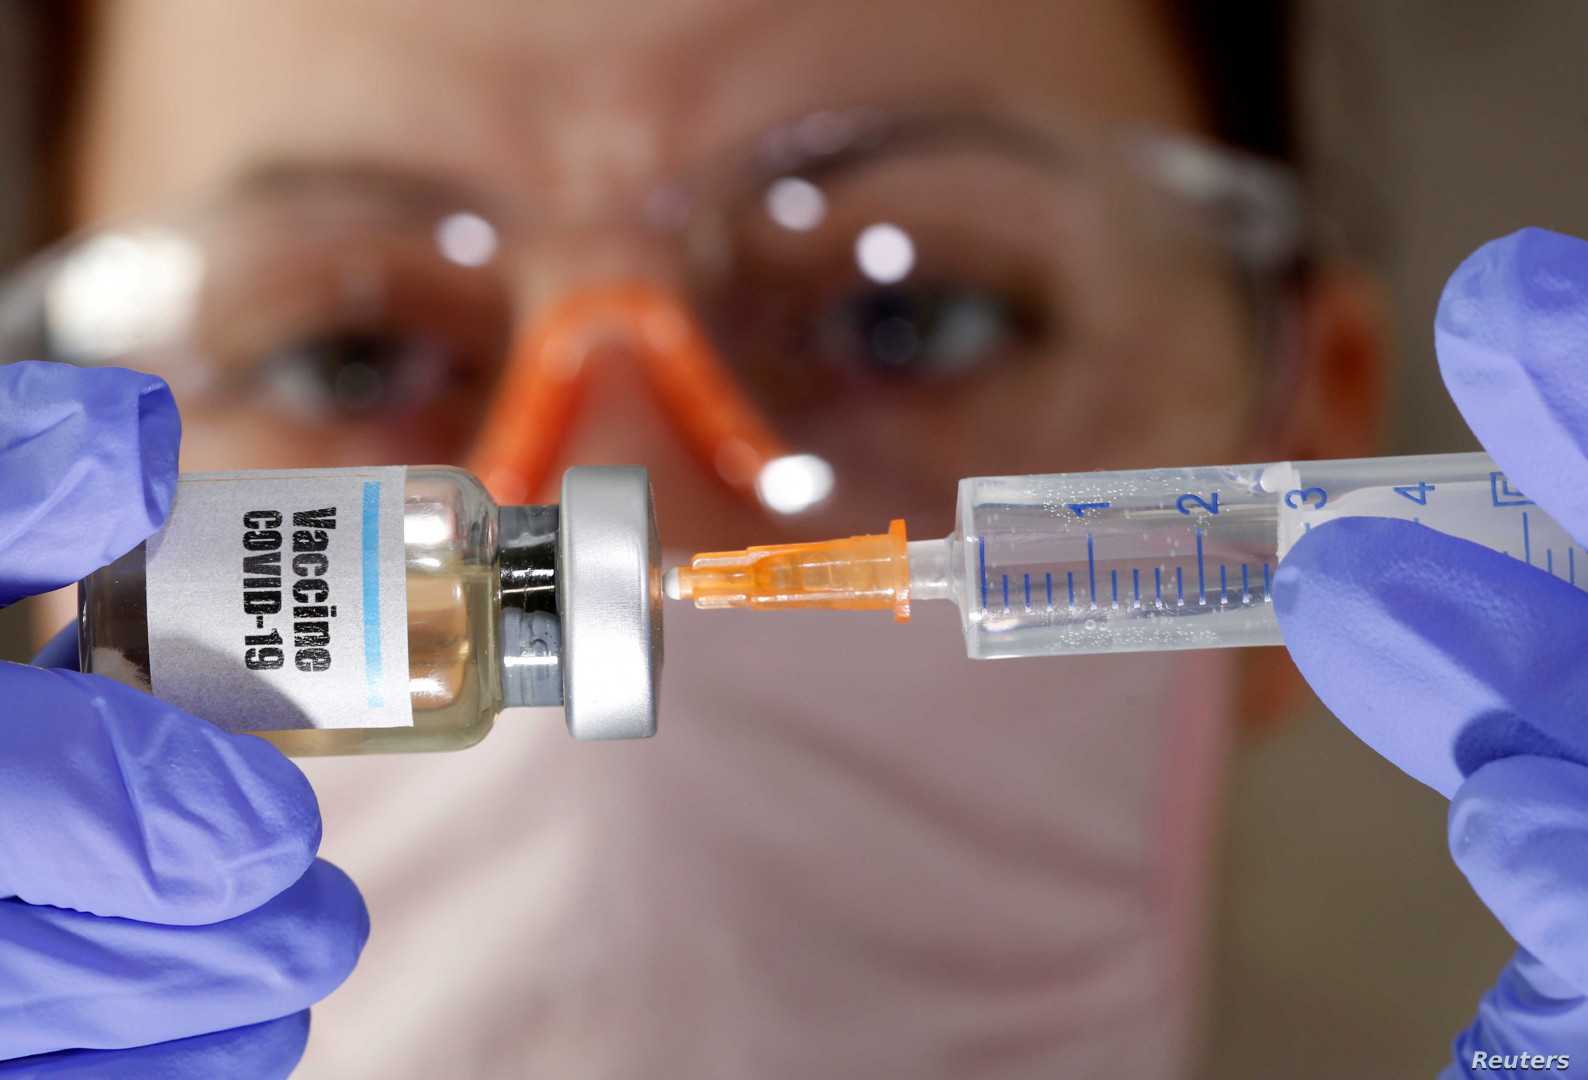 Scientists are concerned about hidden details about Coronavirus vaccines